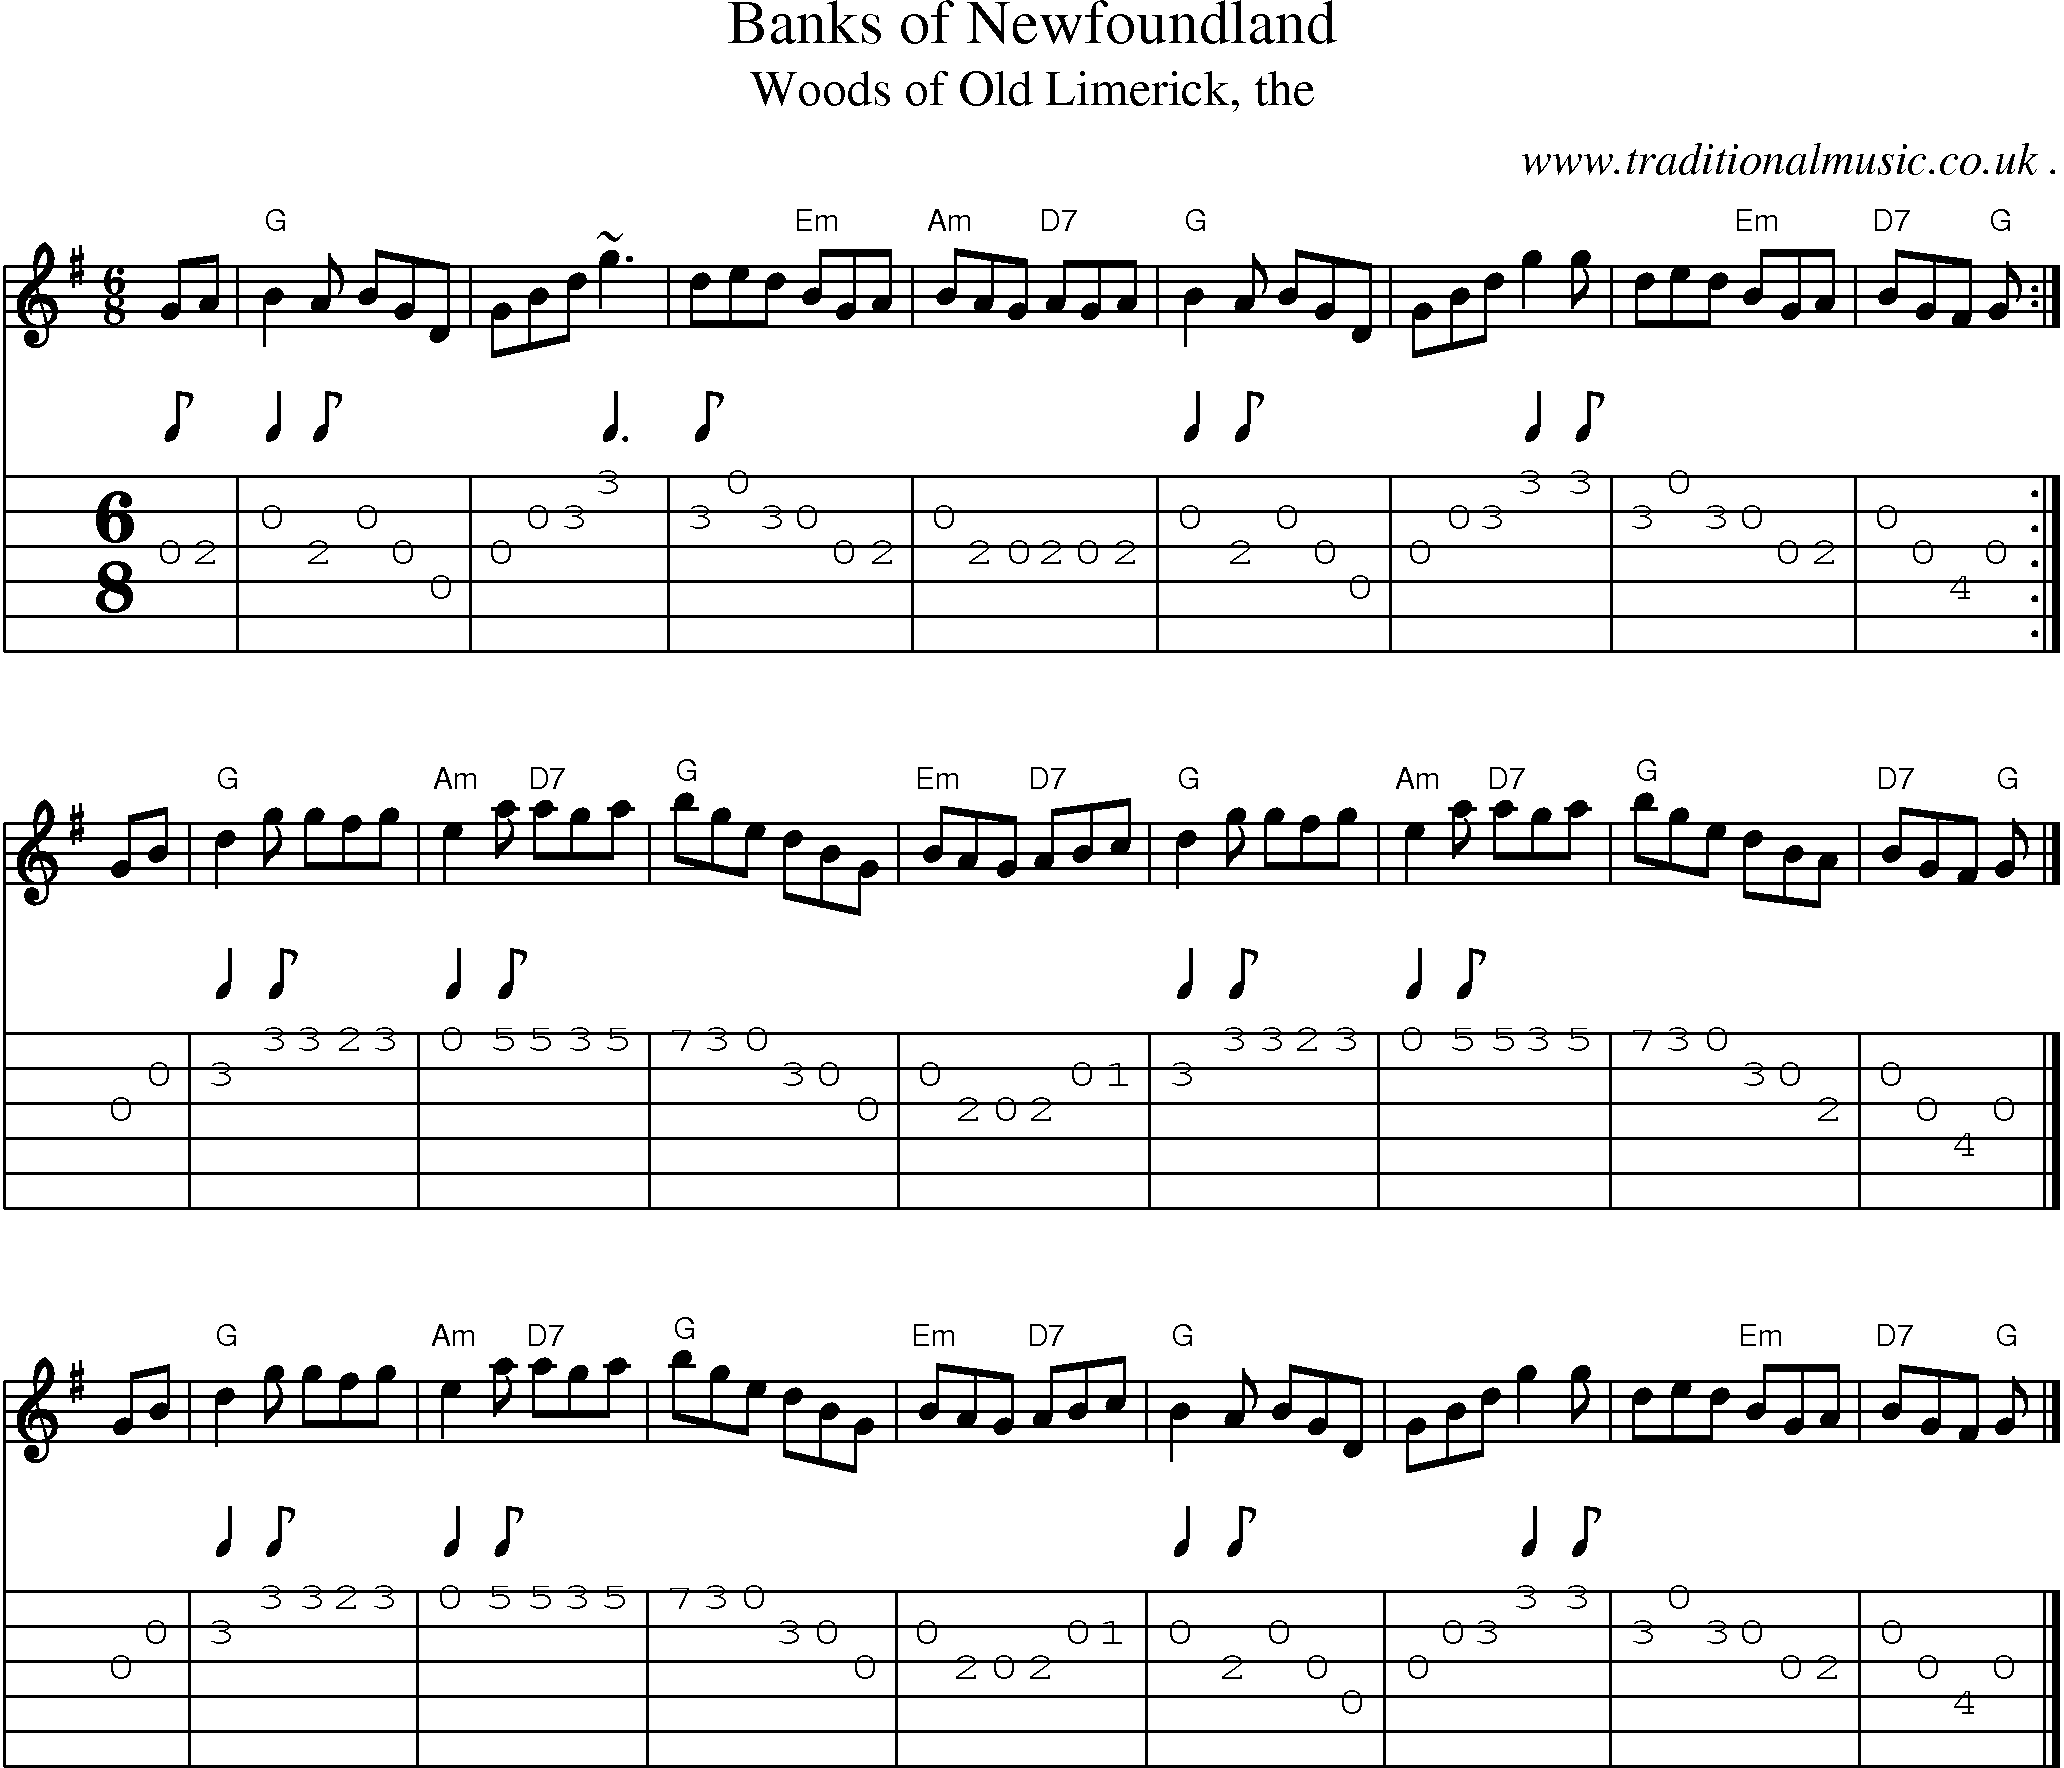 Sheet-music  score, Chords and Guitar Tabs for Banks Of Newfoundland